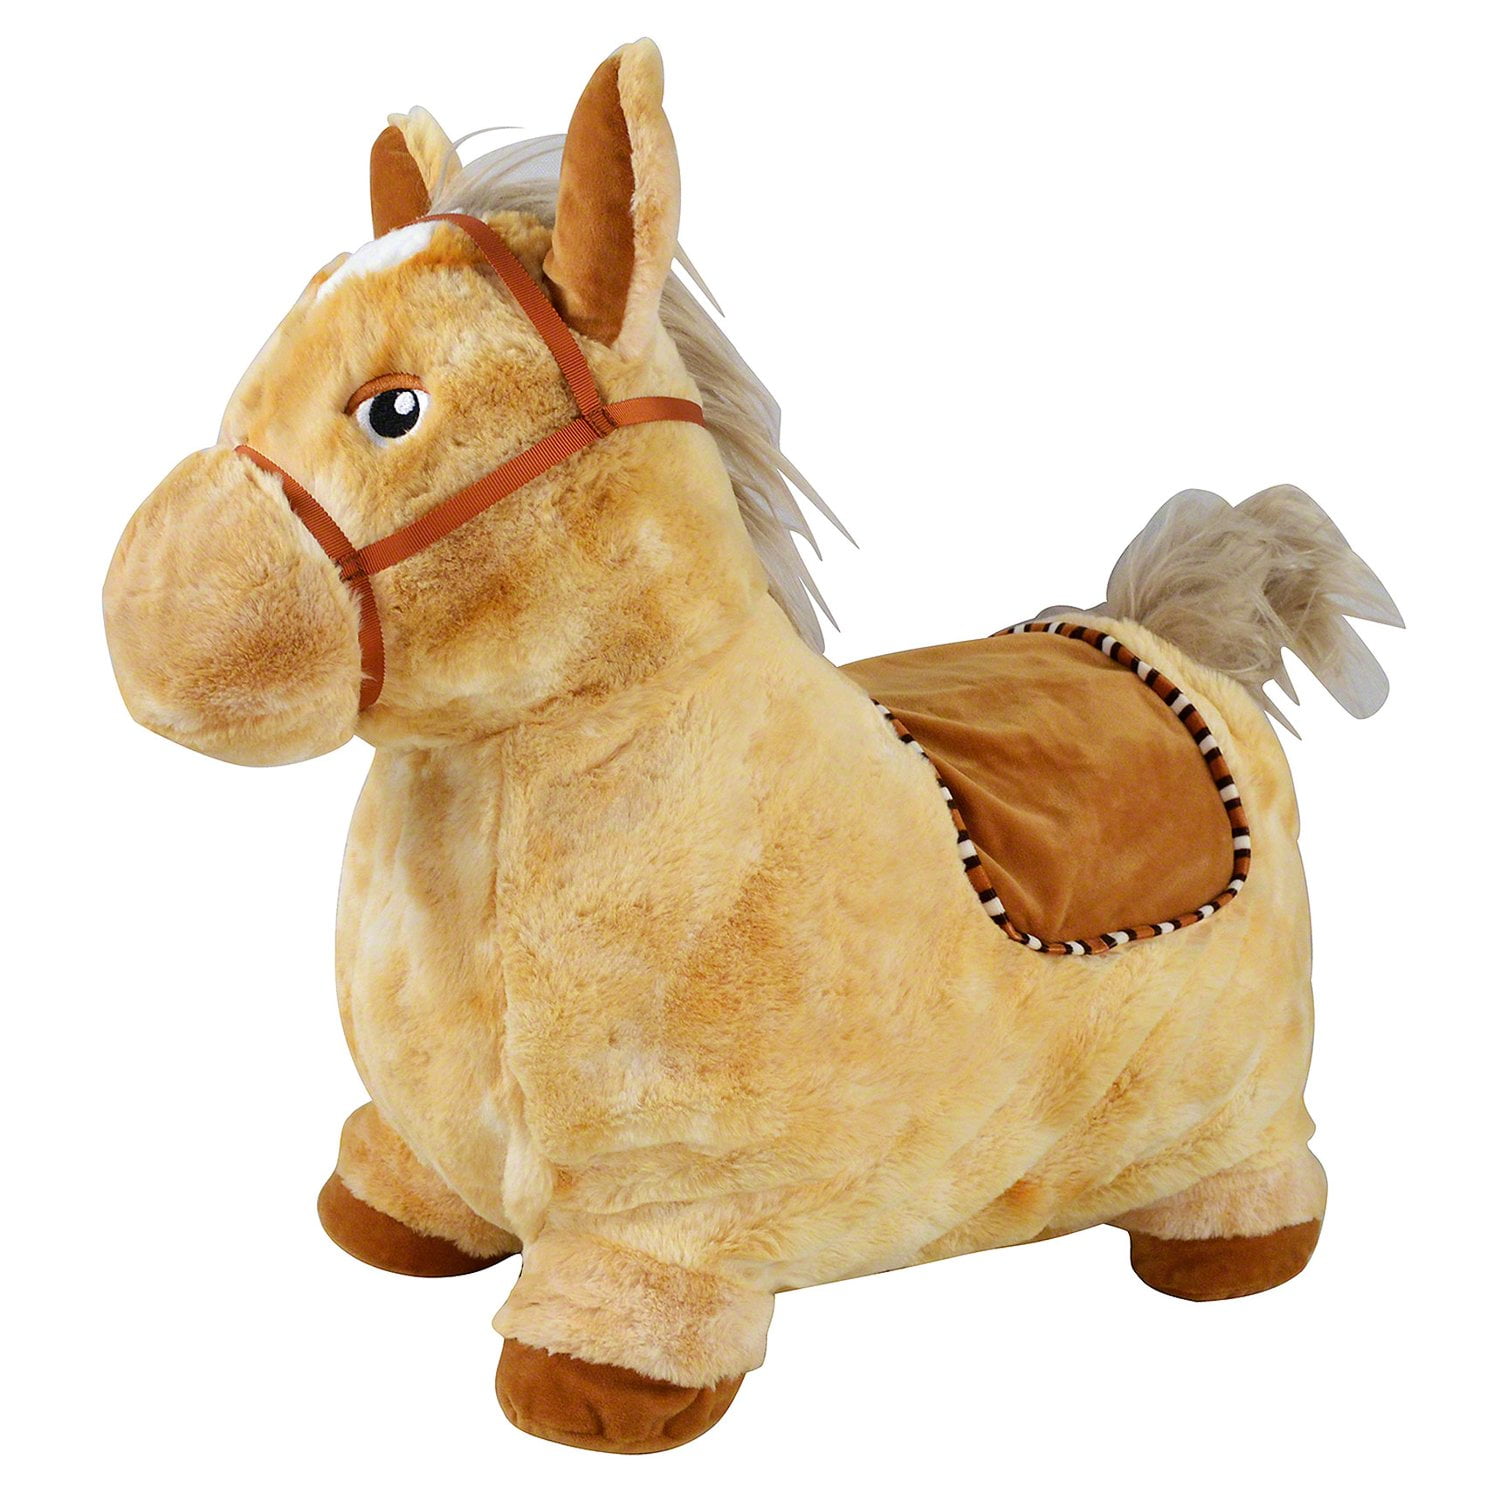 1 Yellow Giraffe Ride on Horse Bouncy Horse for Toddlers with Plush Cover and 1 Pump Hopping Animal Toy Gift for Kids 18 Months